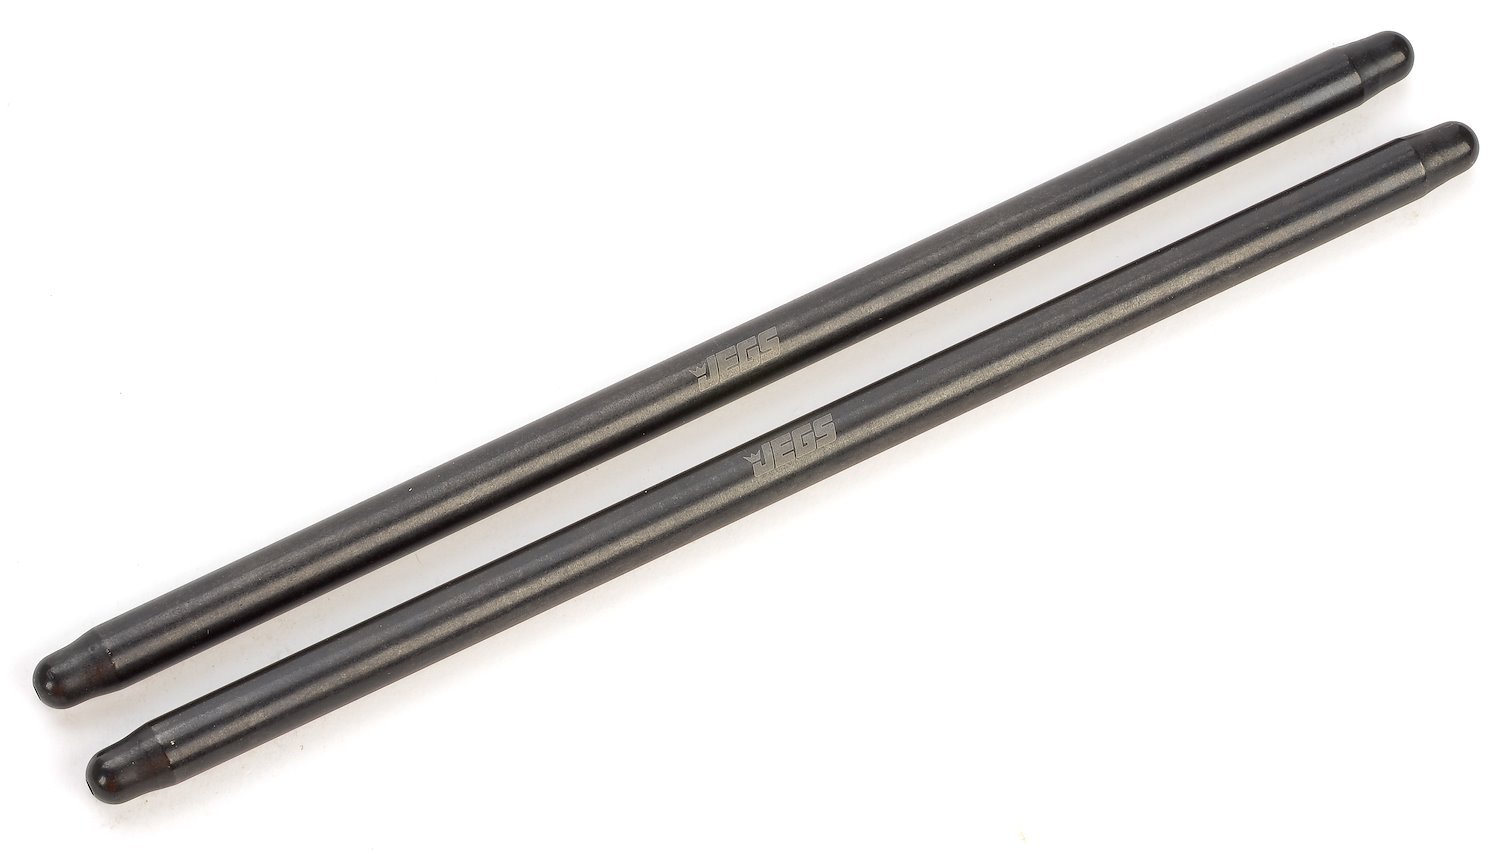 8.680 in. Long Pushrods for Big Block Chevy with Tall Deck (+.400")